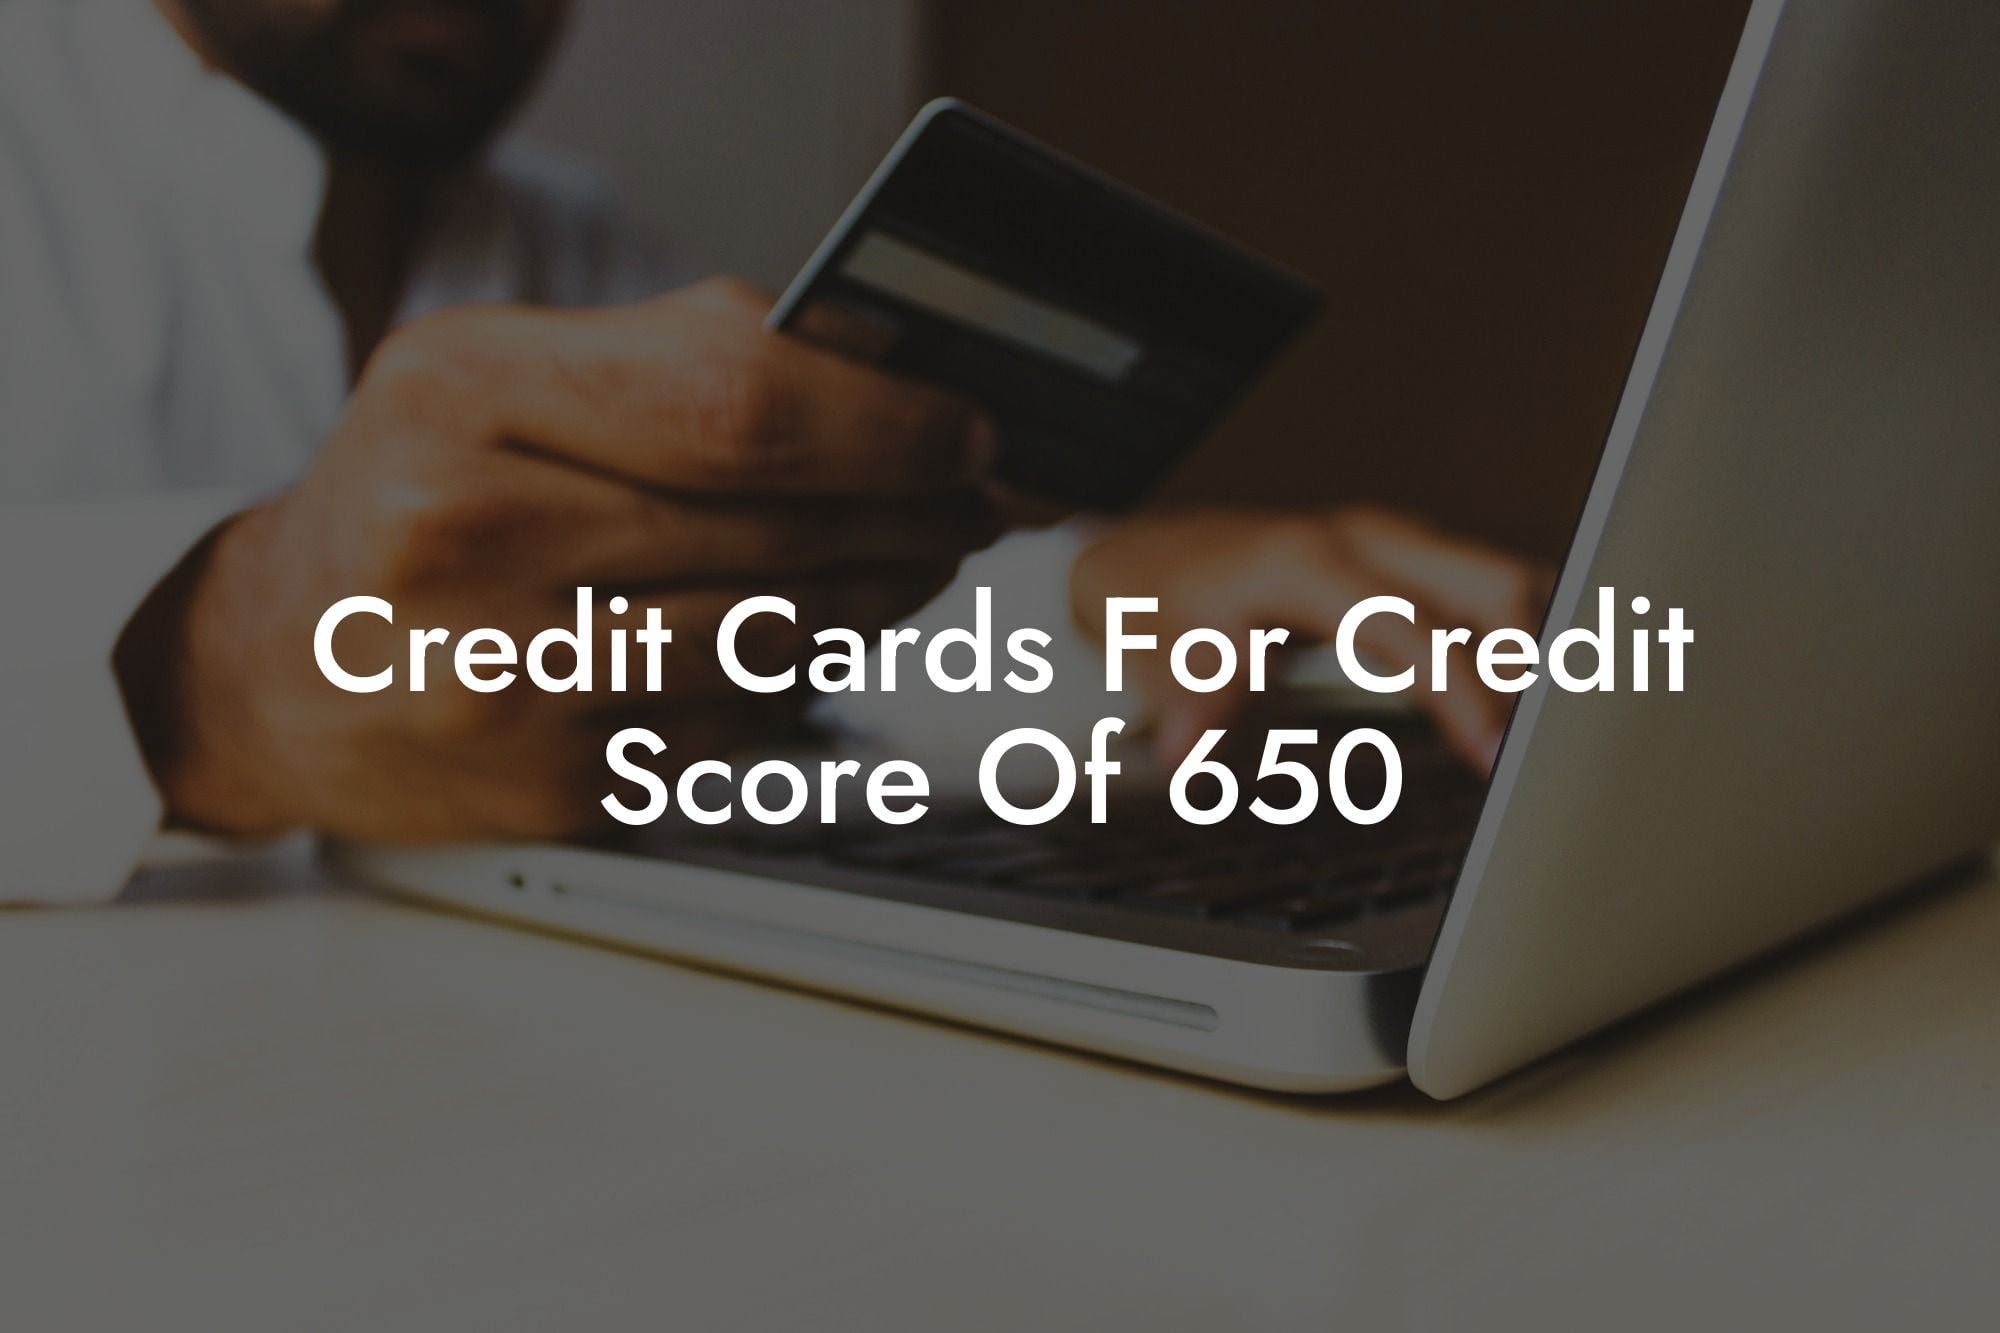 Credit Cards For Credit Score Of 650